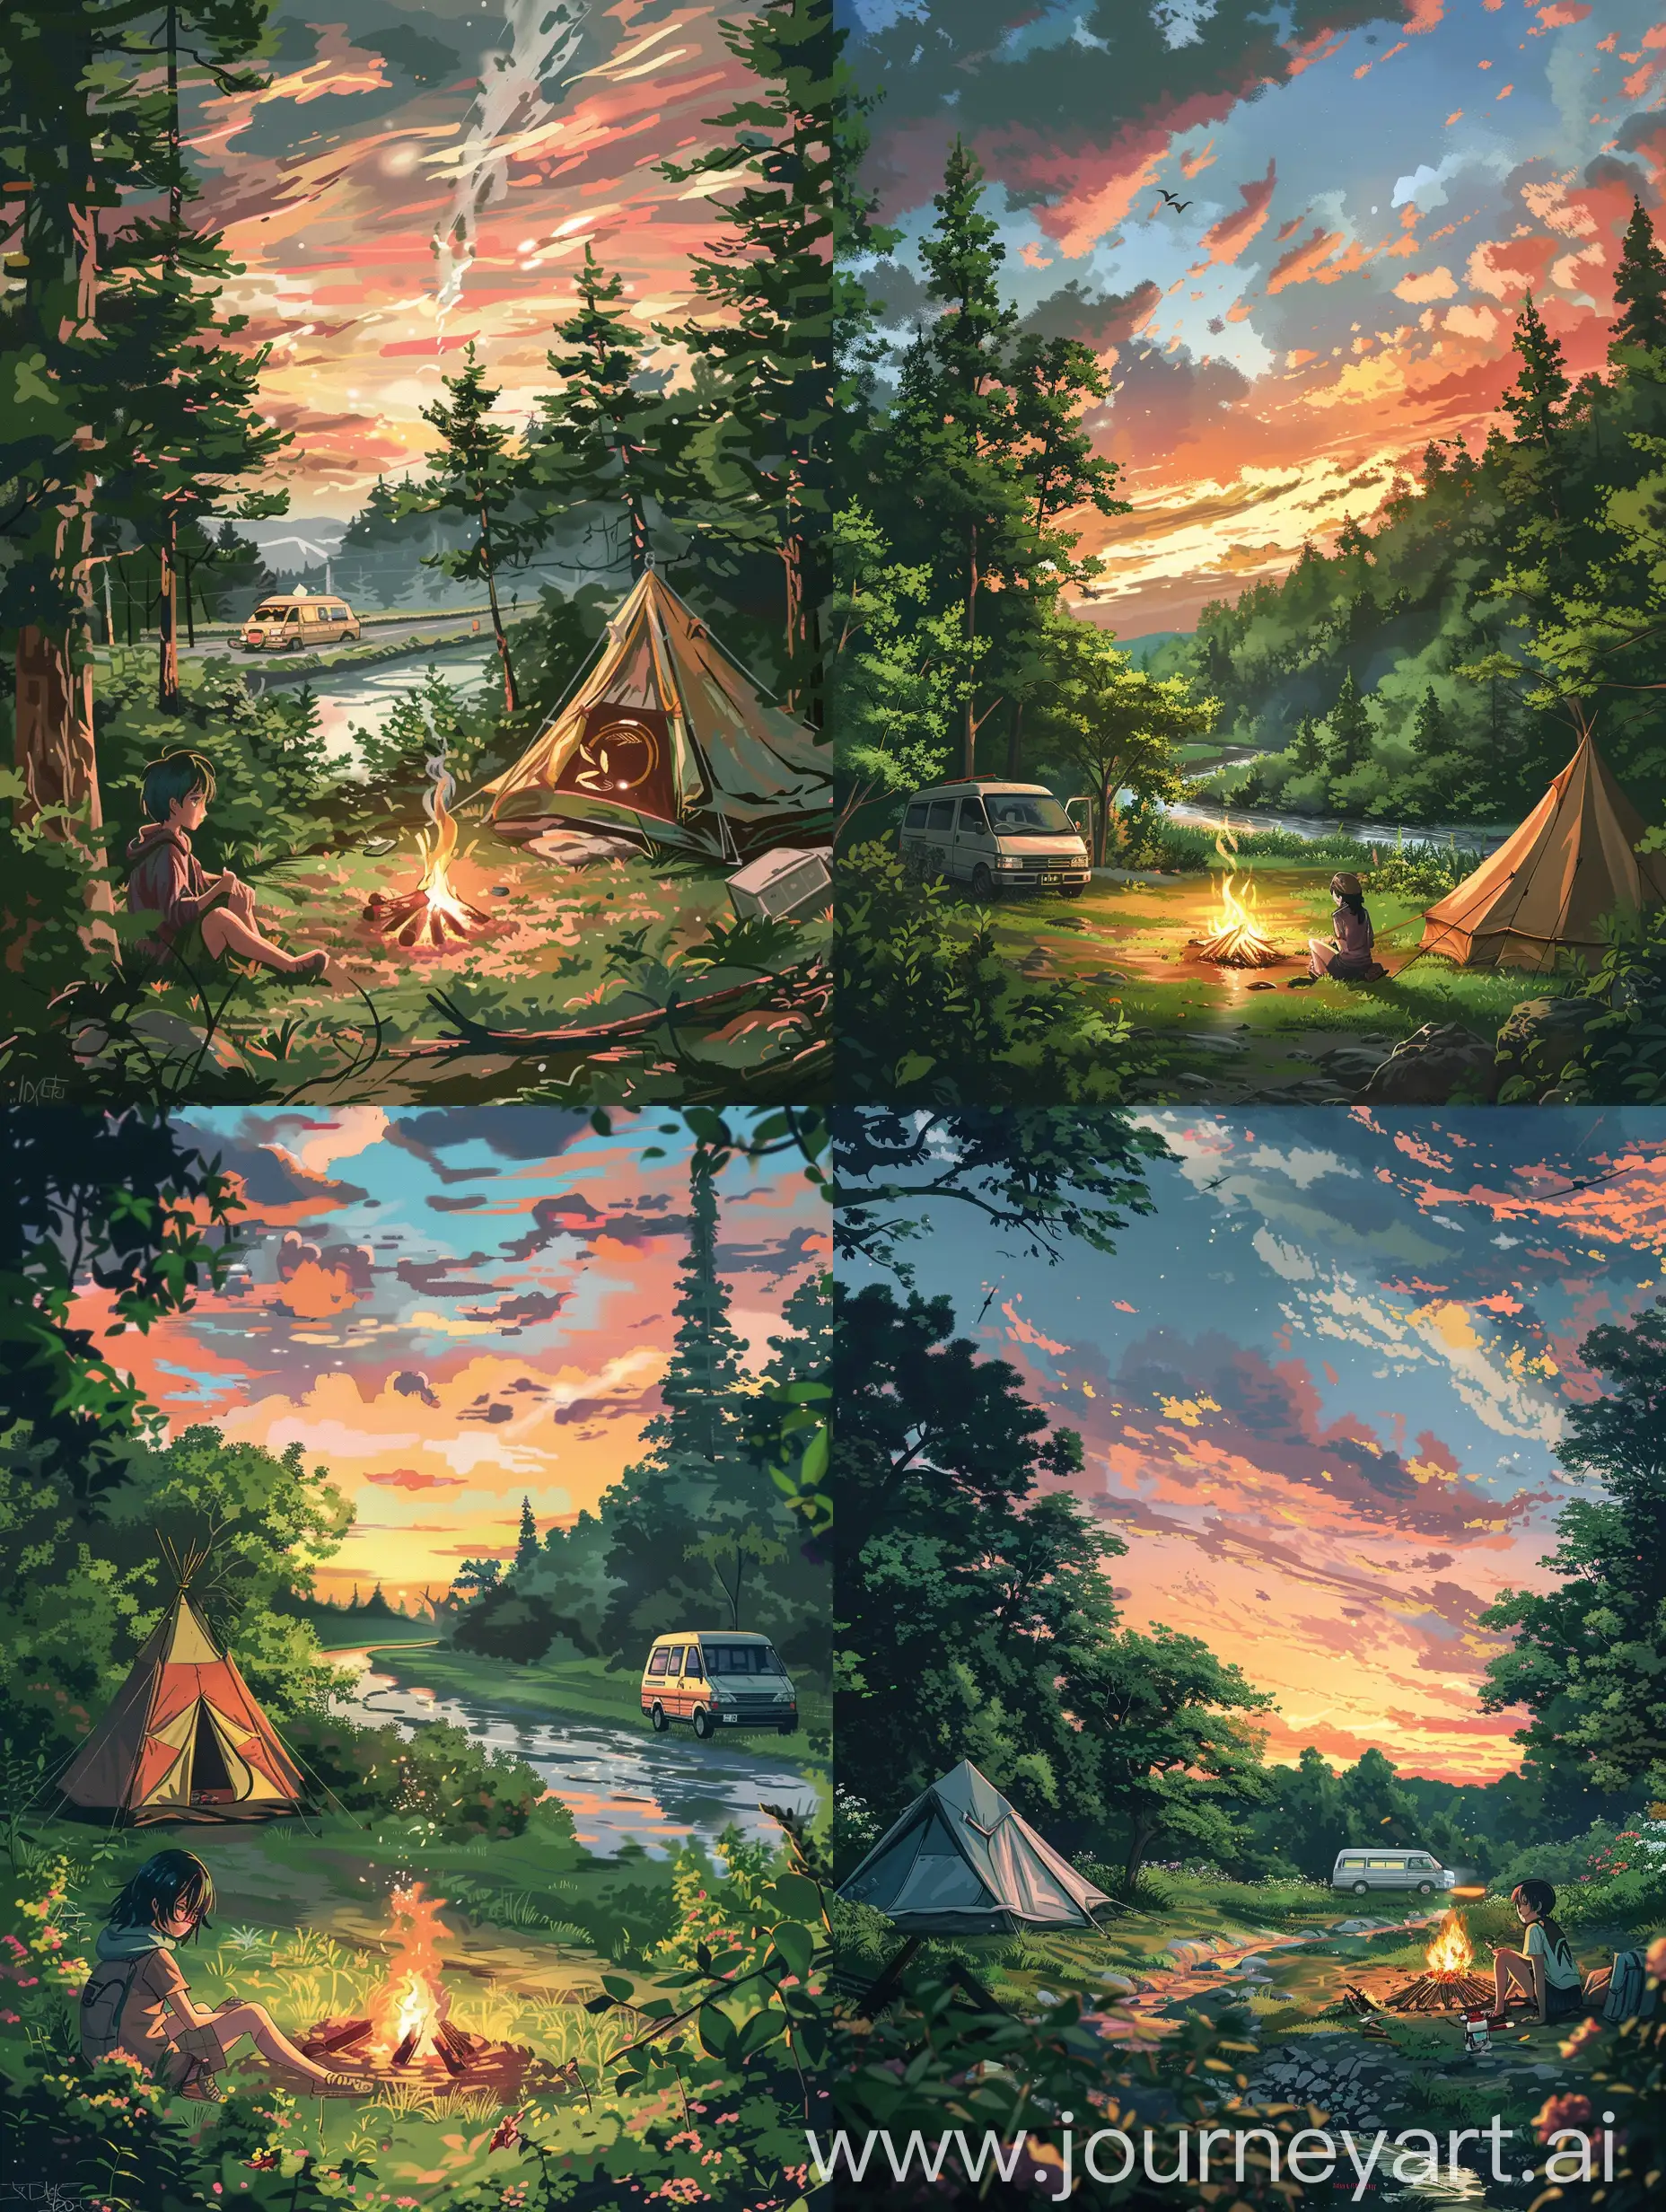 Beautiful anime style,Makato Shinkai style with a mix of ghibli style,an 18-year-old individual sitting near a crackling campfire, surrounded by the lush greenery of a small forest. In the background, depict a tent standing proudly amidst the trees, with a van cab visible at a distance, subtly hinting at an adventurous journey. Capture the essence of a serene summer evening with a sky painted in warm hues of pink and orange as the sun sets, casting a golden glow over the landscape. Ensure the inclusion of a tranquil river flowing gently nearby, adding depth and movement to the scene.






